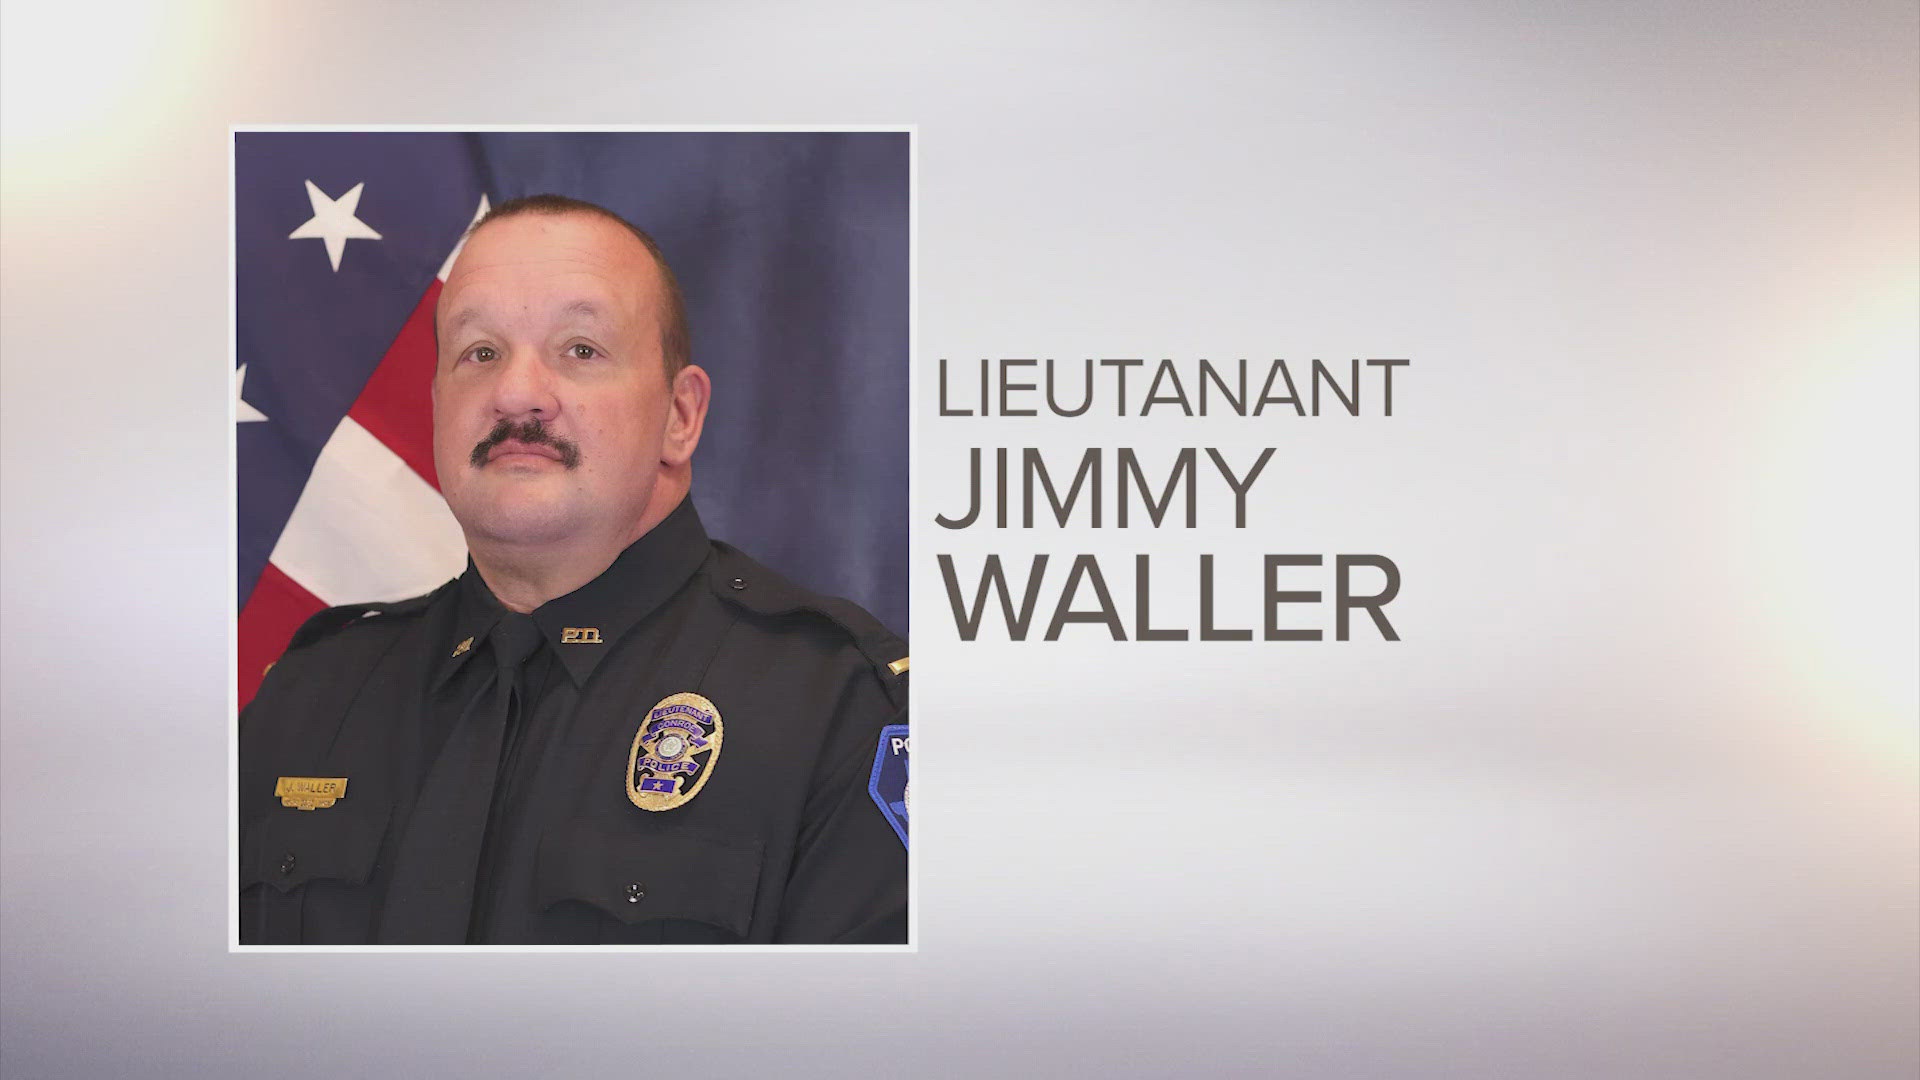 Lt. Jimmy Waller and his wife were both injured in the tornado that happened in Trinity County on Sunday, April 28.